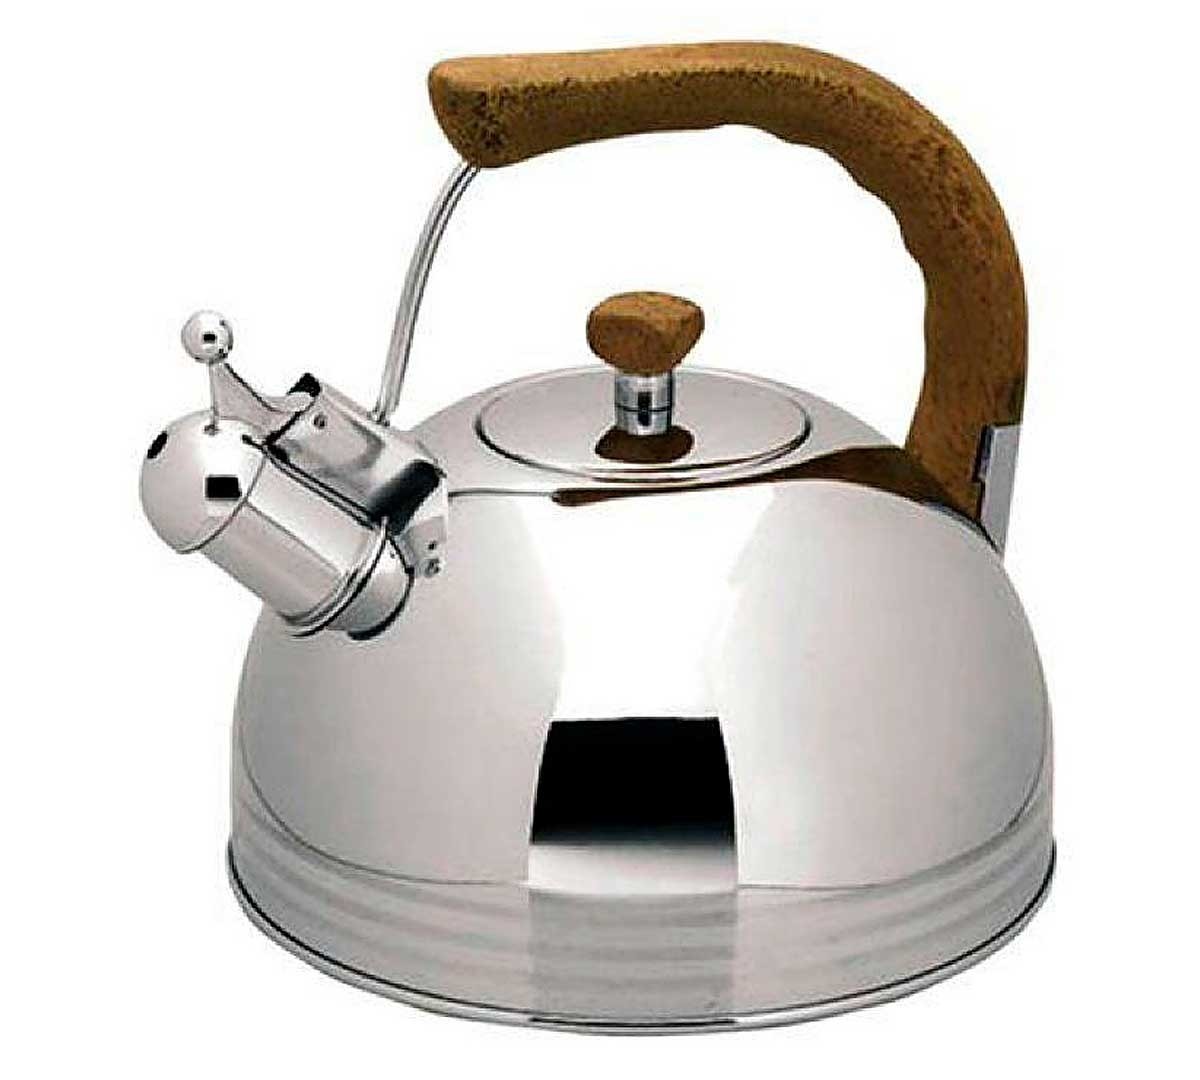 Whistling tea kettle made in usa